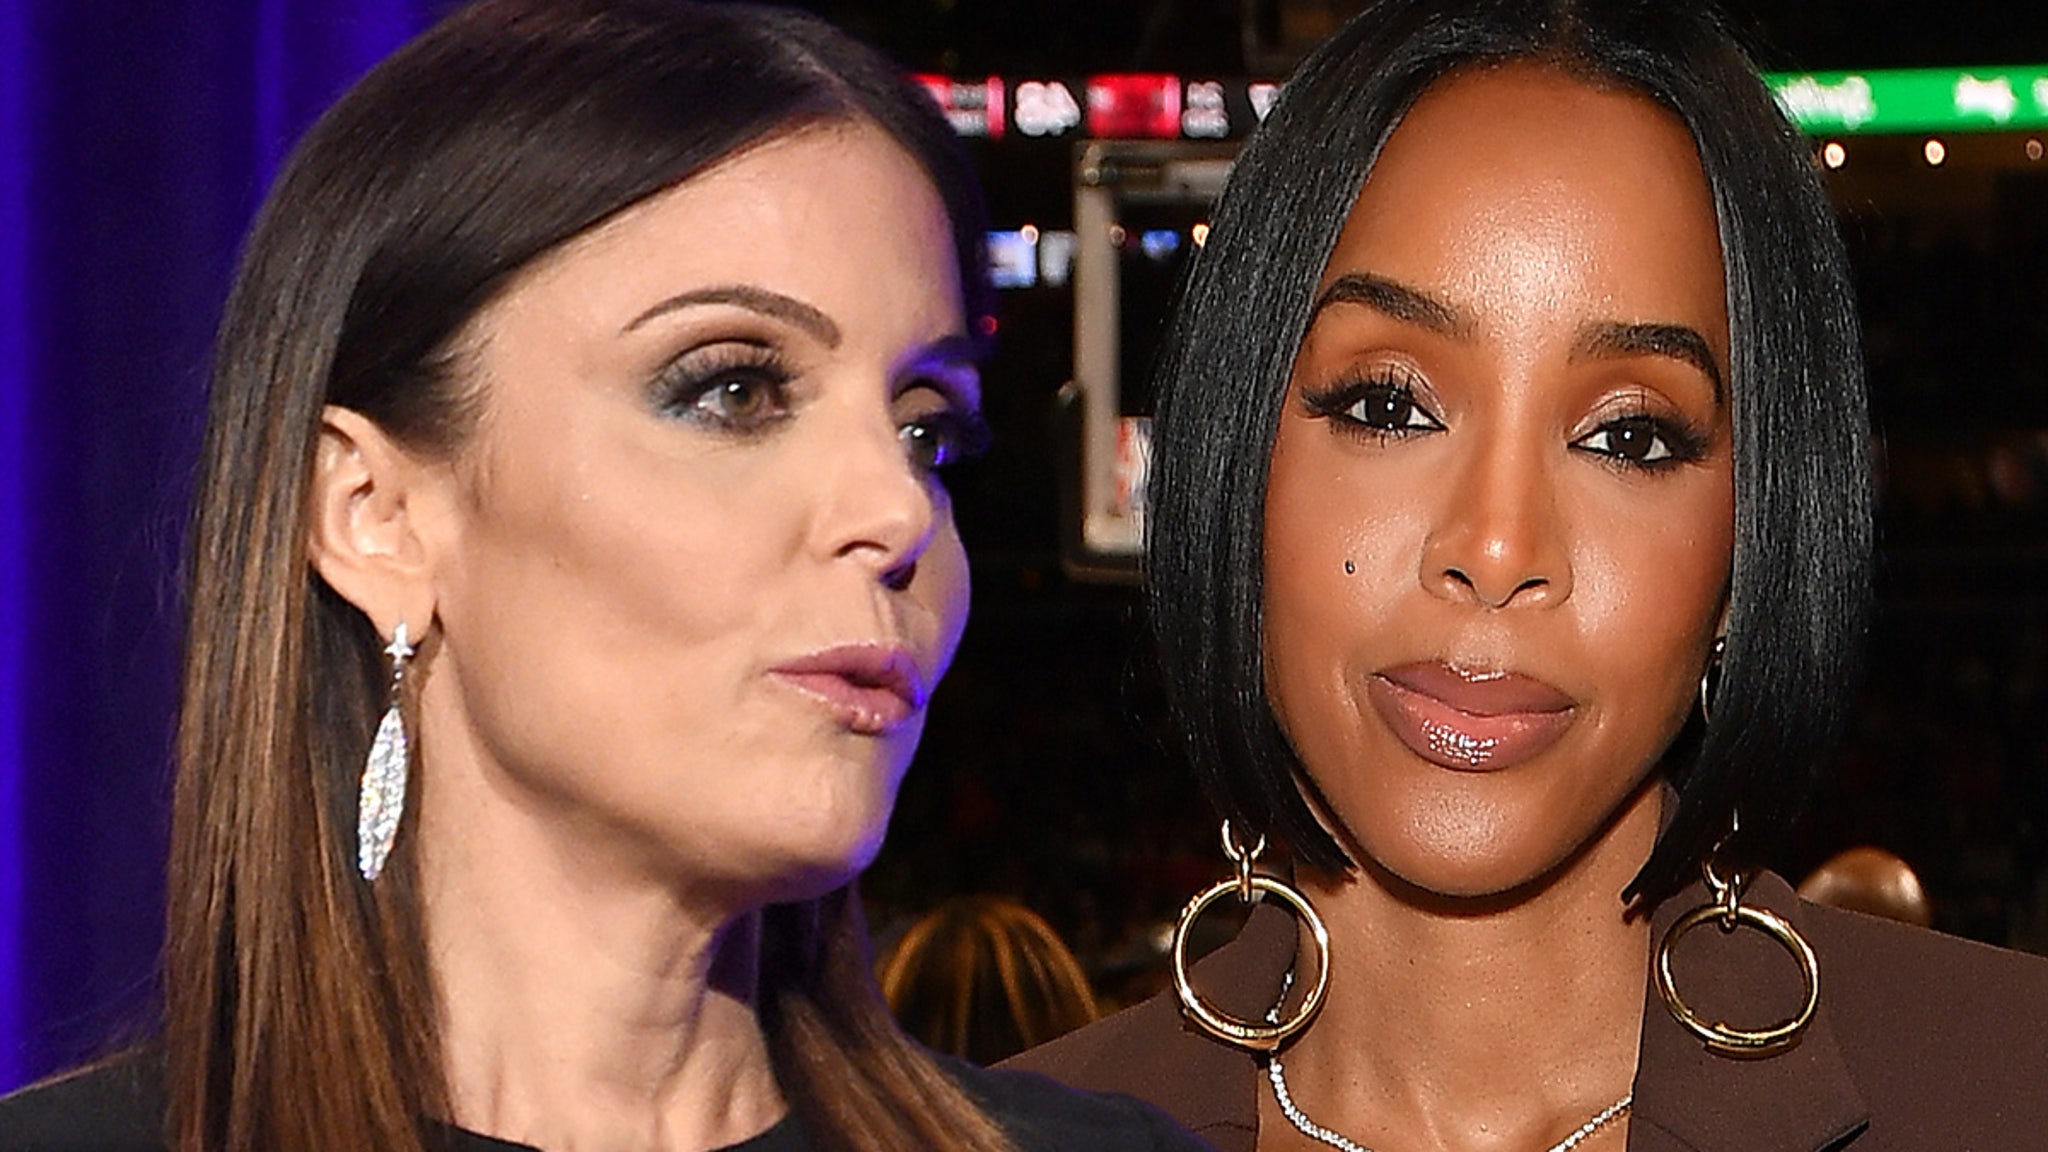 Bethenny Frankel Blasts Kelly Rowland For ‘Diva Expectations’ On ‘Today’ Show